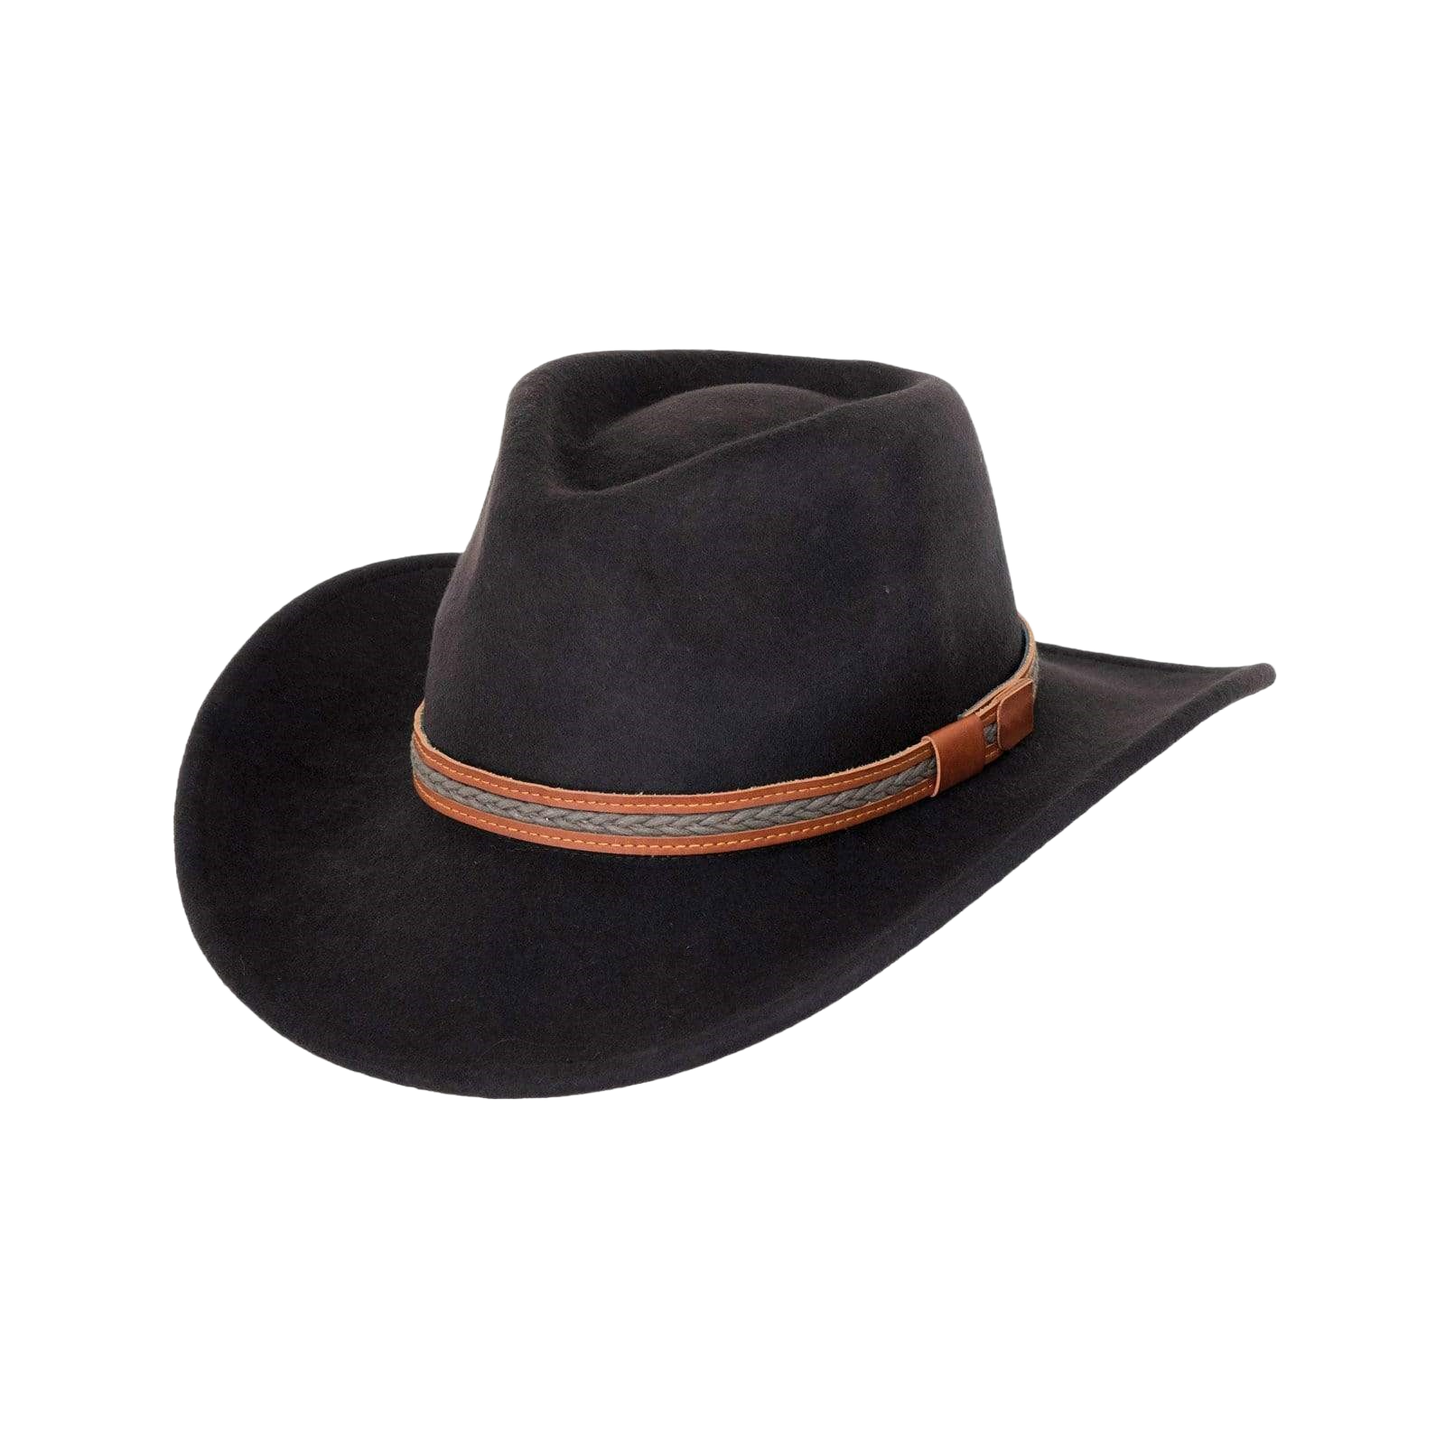 Hat Bands - Outback Trading Company